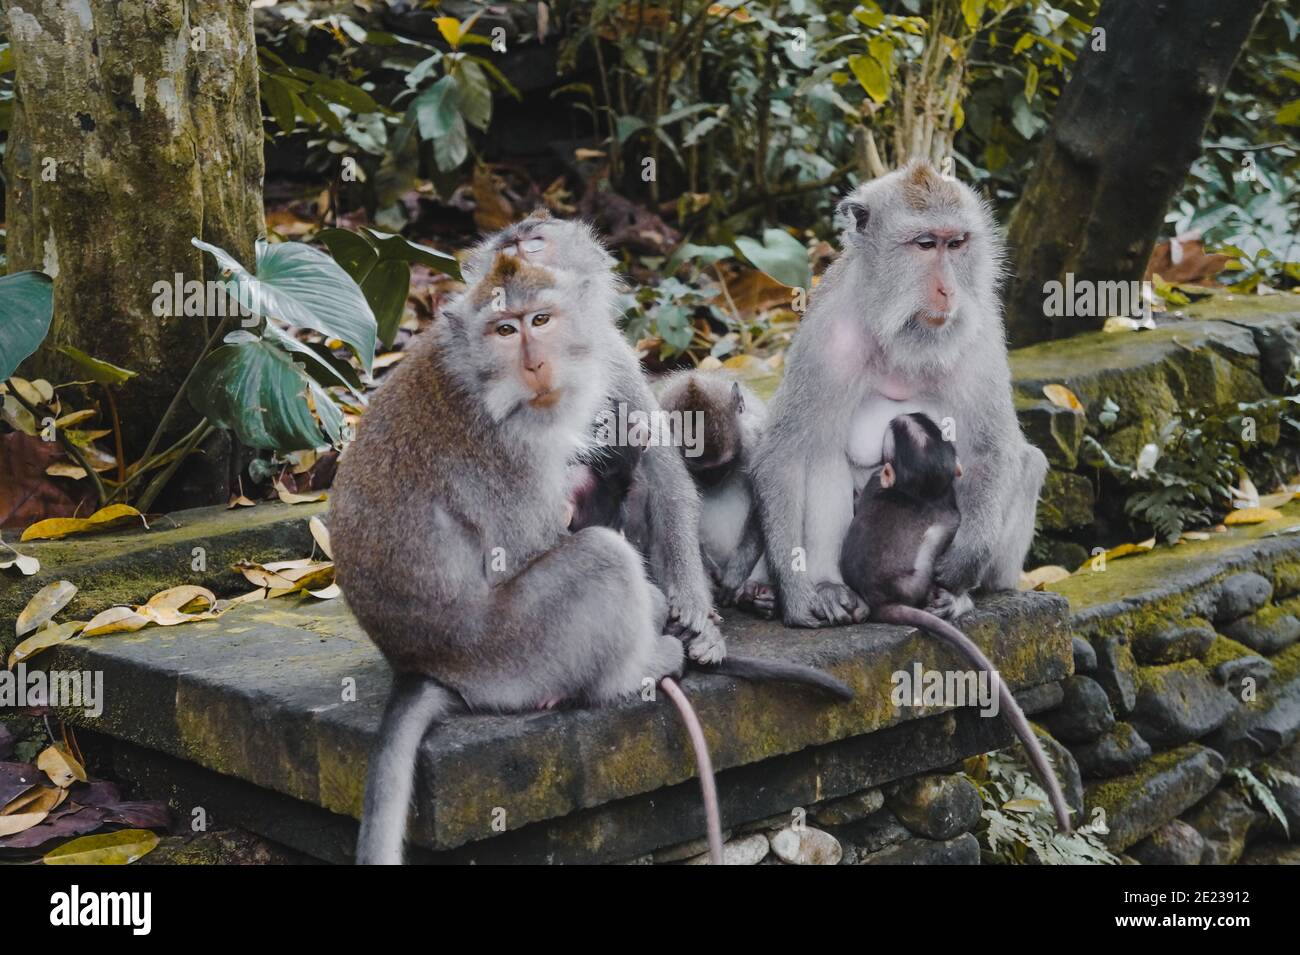 Monkeys in the wild jungle of Indonesia. Stock Photo